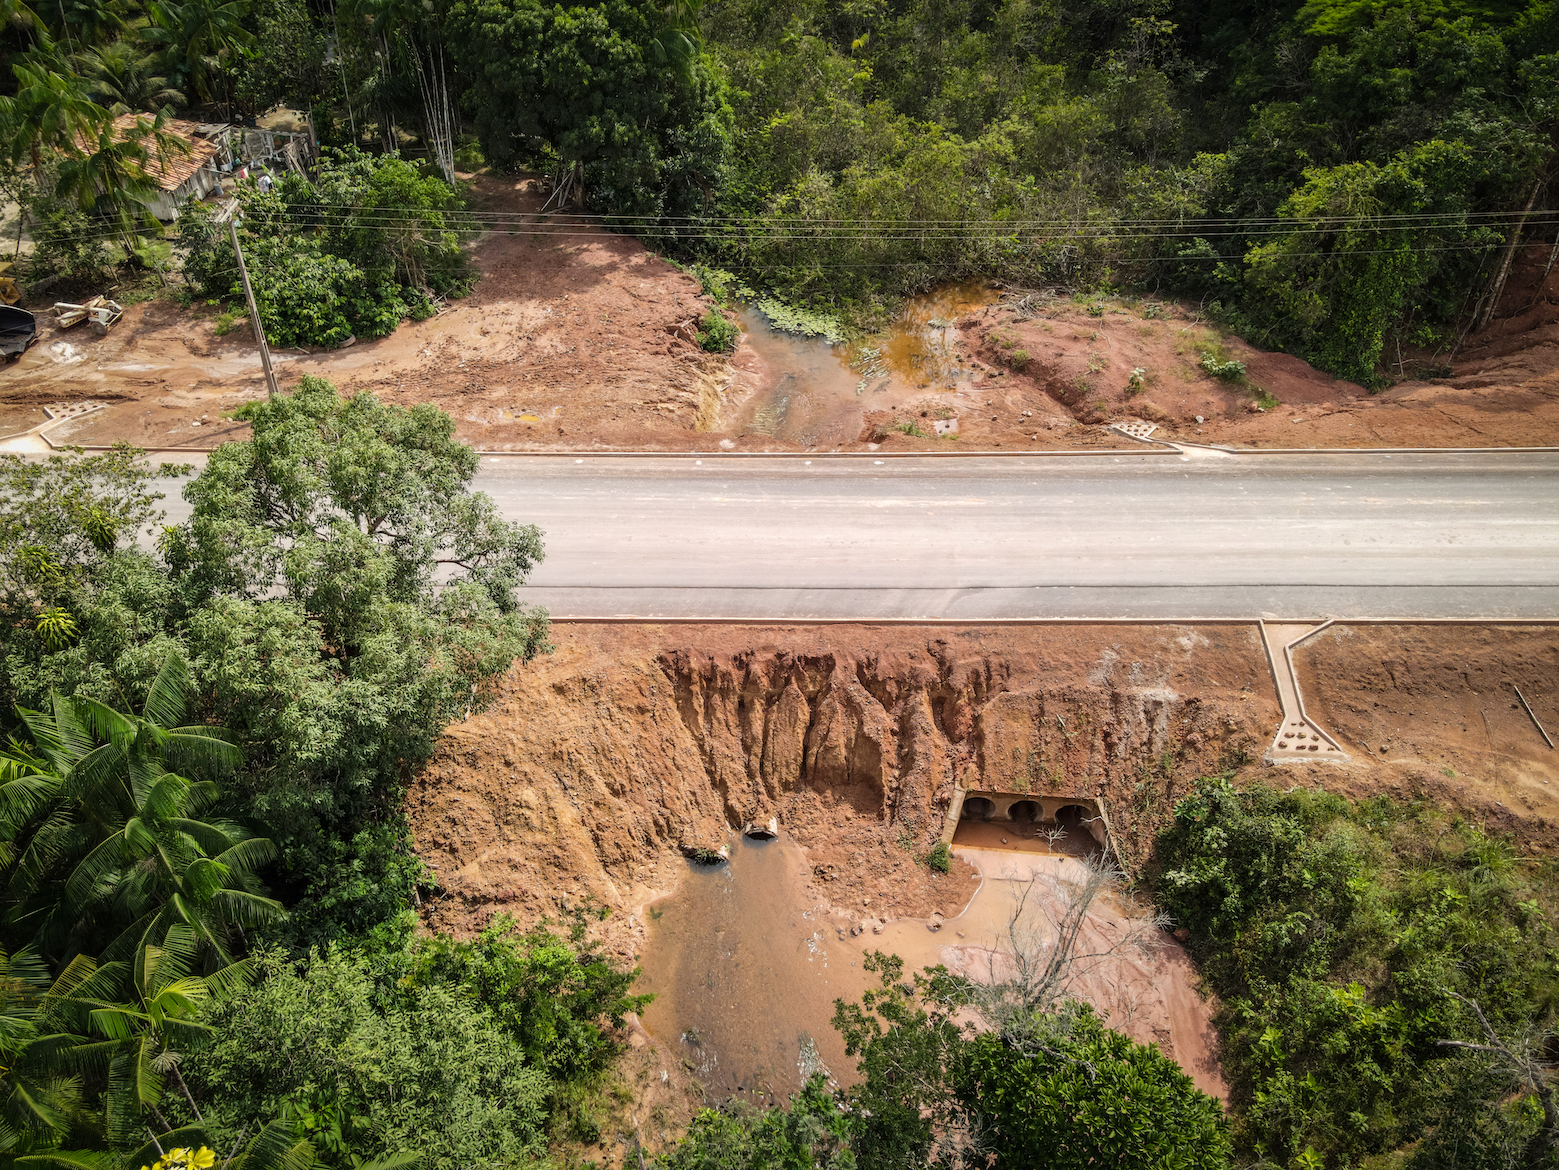 Aerial view of the construction work on the Transquilombola road.